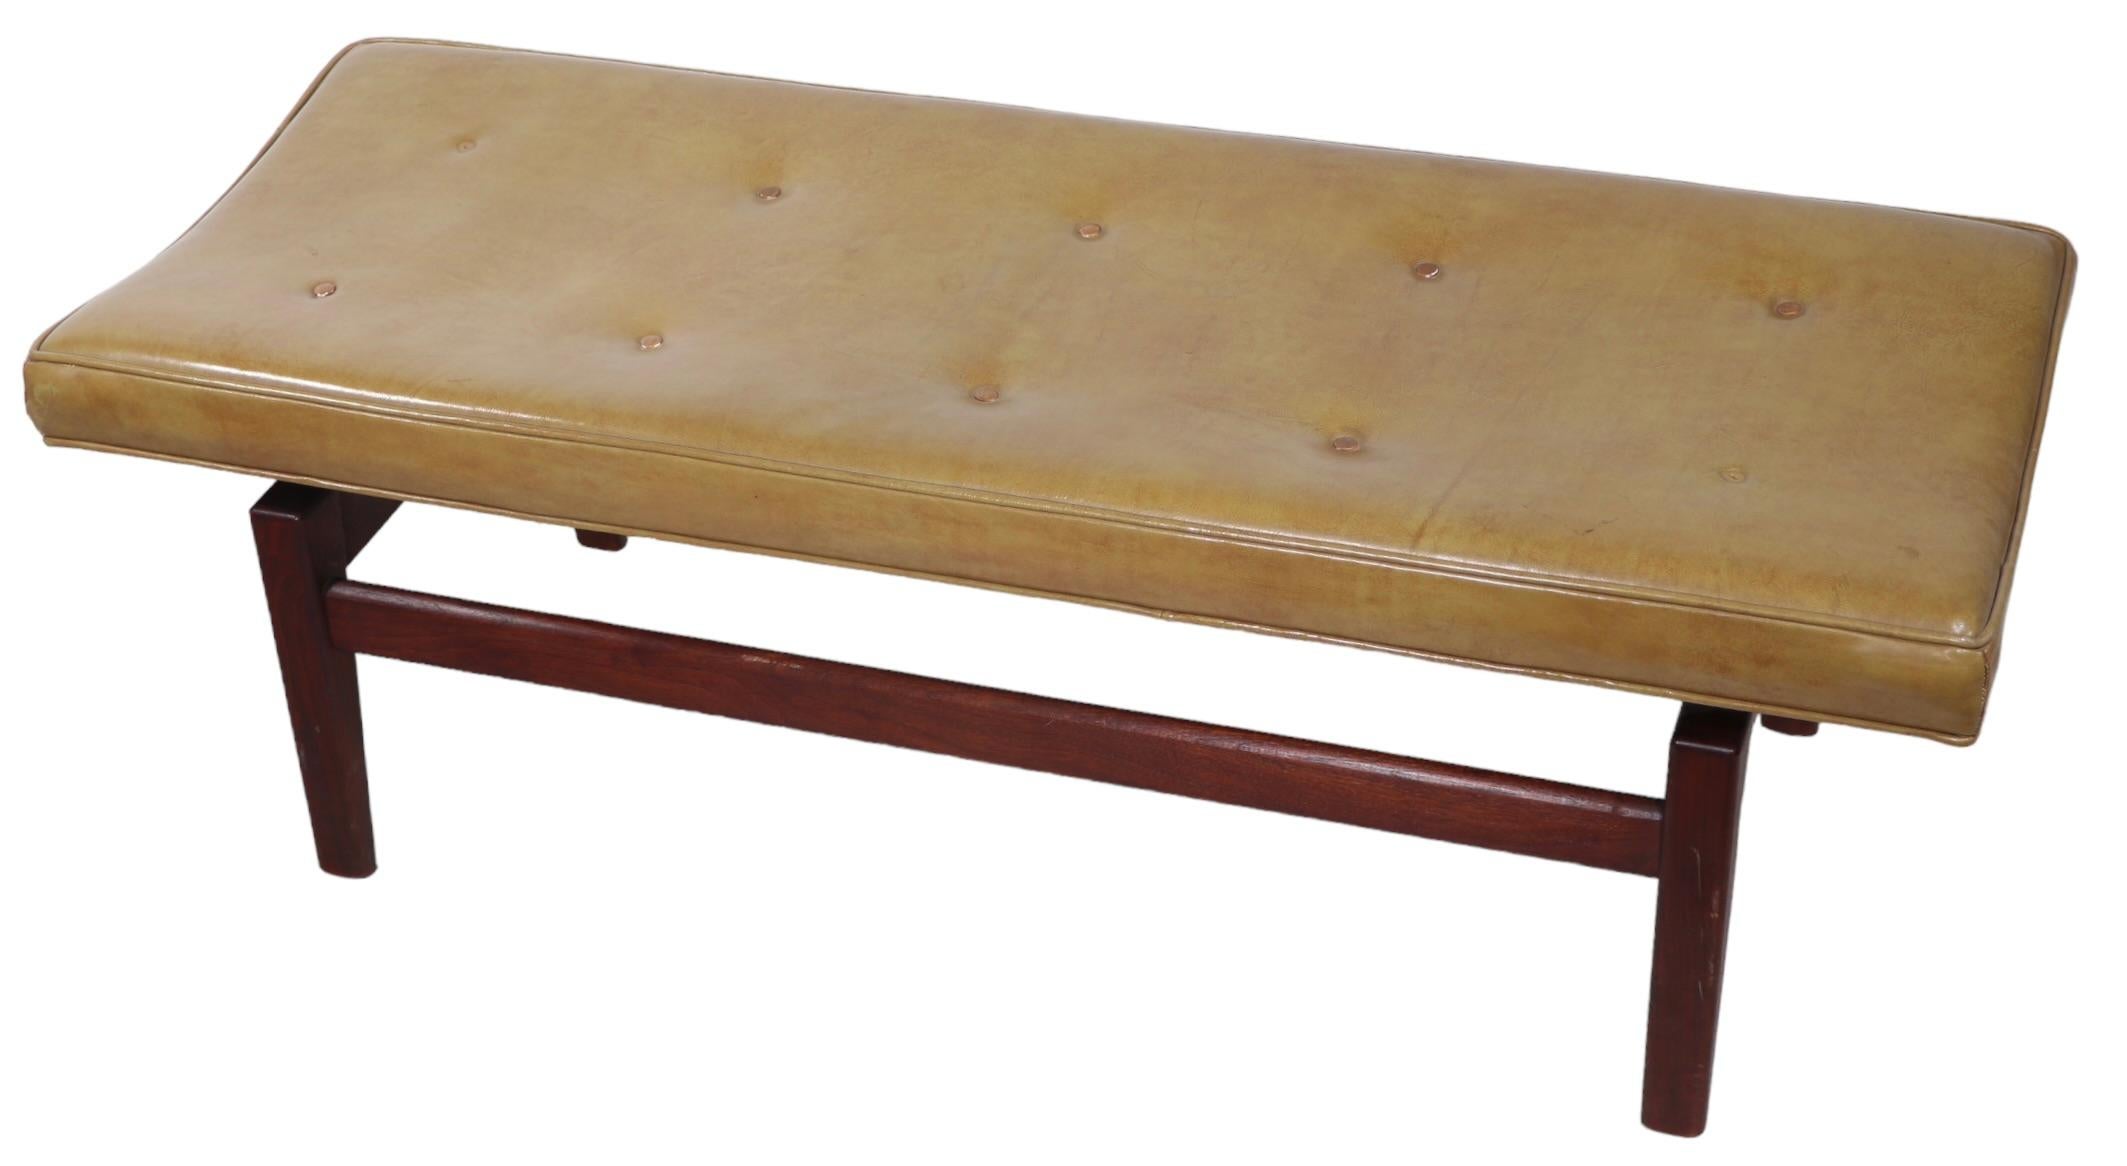   Architectural Mid Century Jens Risom Bench with Walnut Legs and Leather Top  For Sale 4